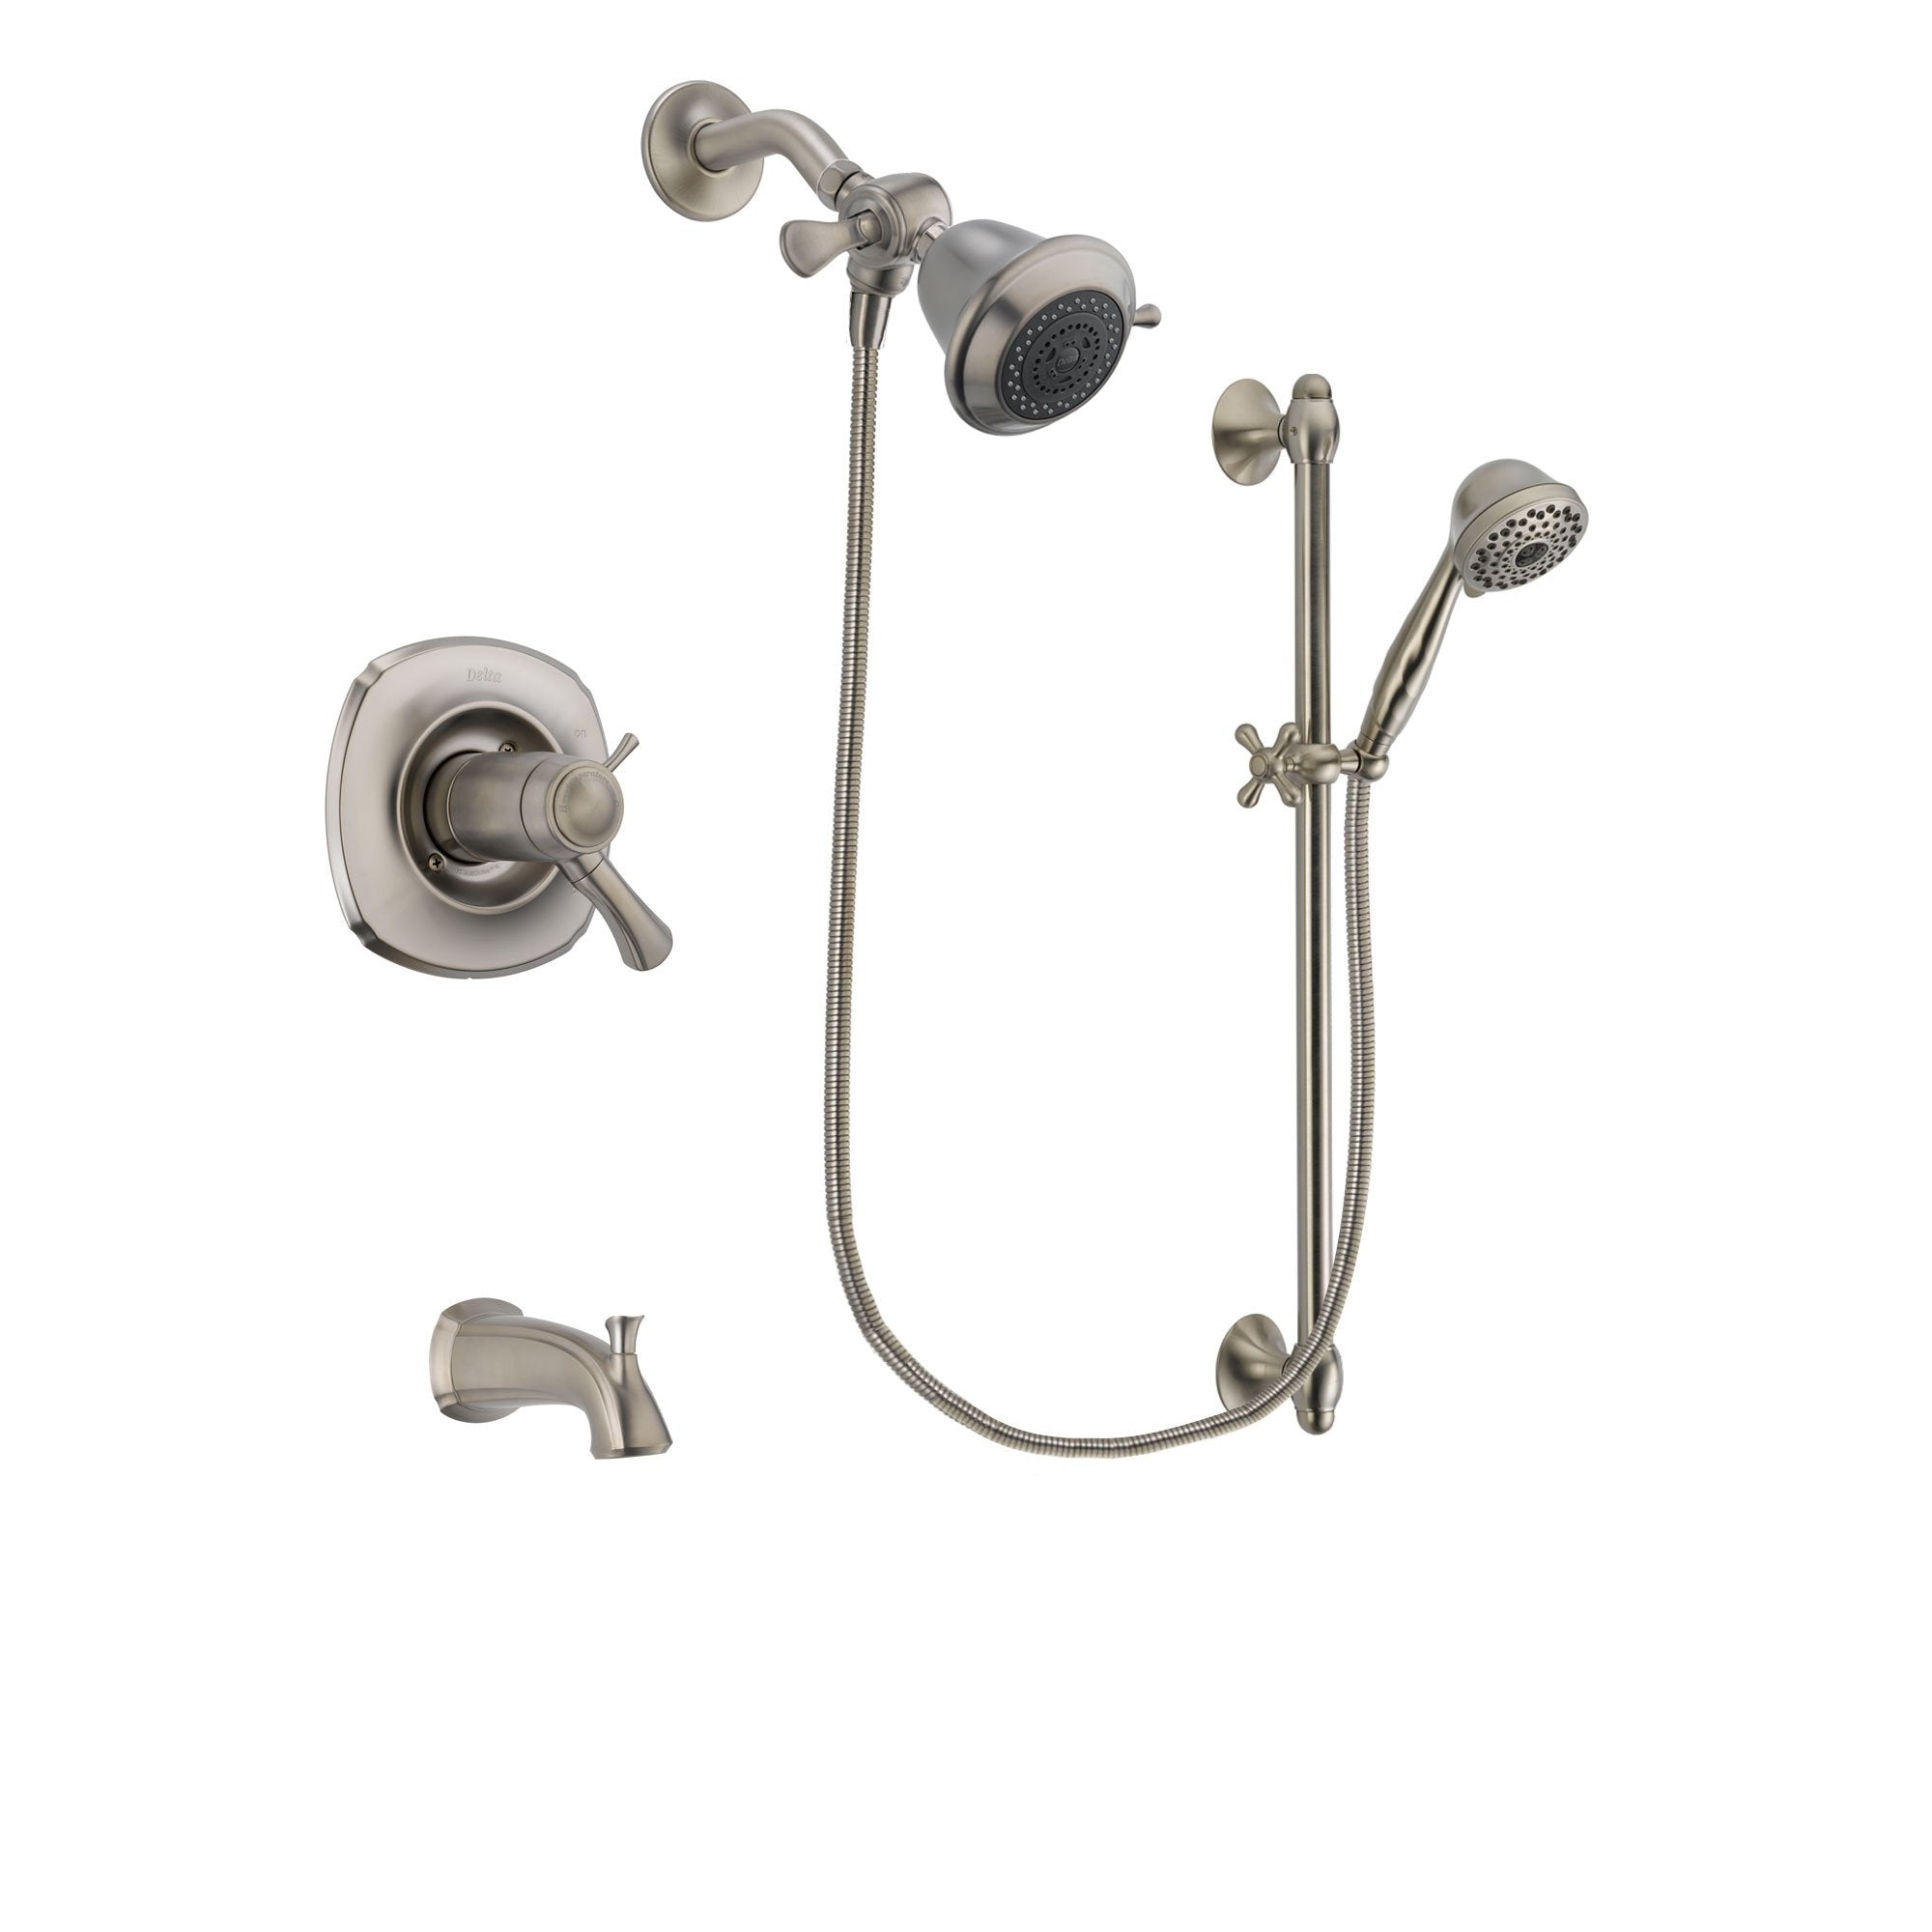 Delta Addison Stainless Steel Finish Thermostatic Tub and Shower Faucet System Package with Shower Head and 7-Spray Handheld Shower with Slide Bar Includes Rough-in Valve and Tub Spout DSP1655V